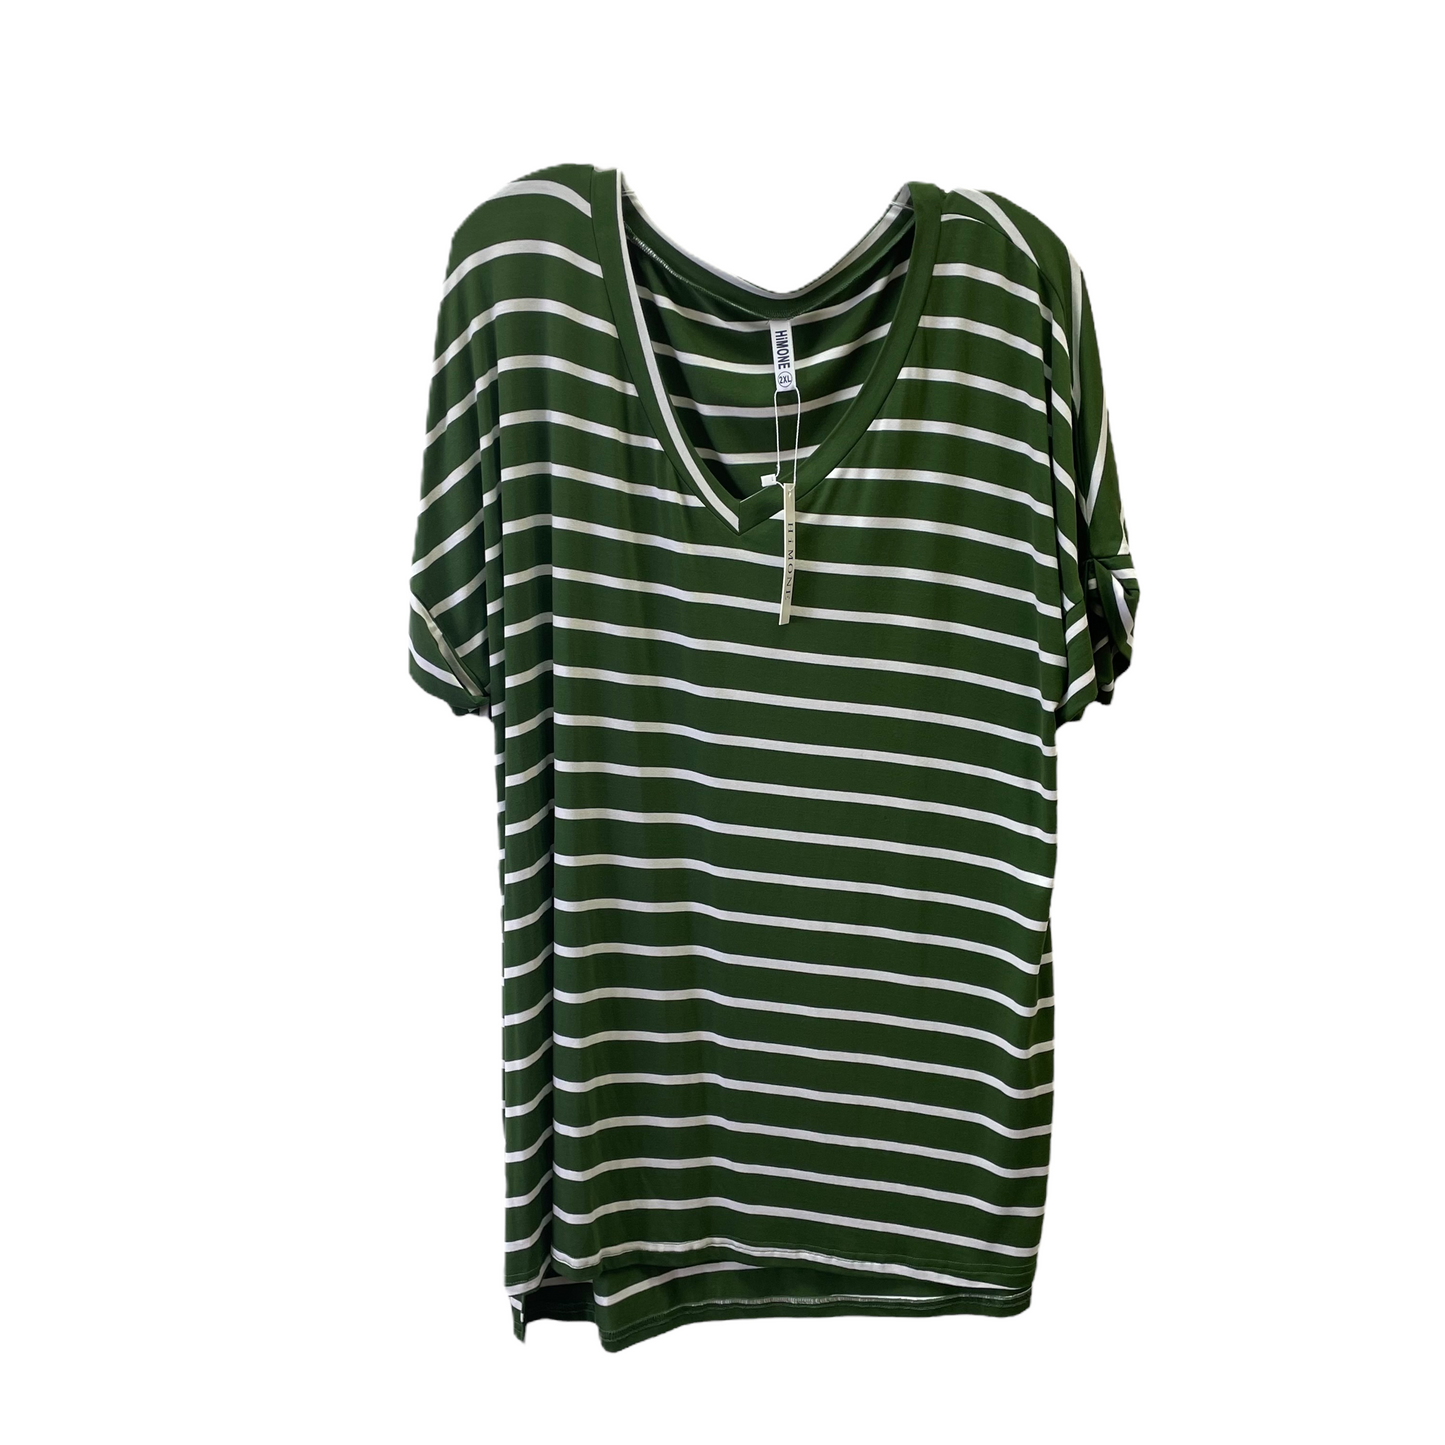 Green & White Tunic Short Sleeve By himone, Size: 2x